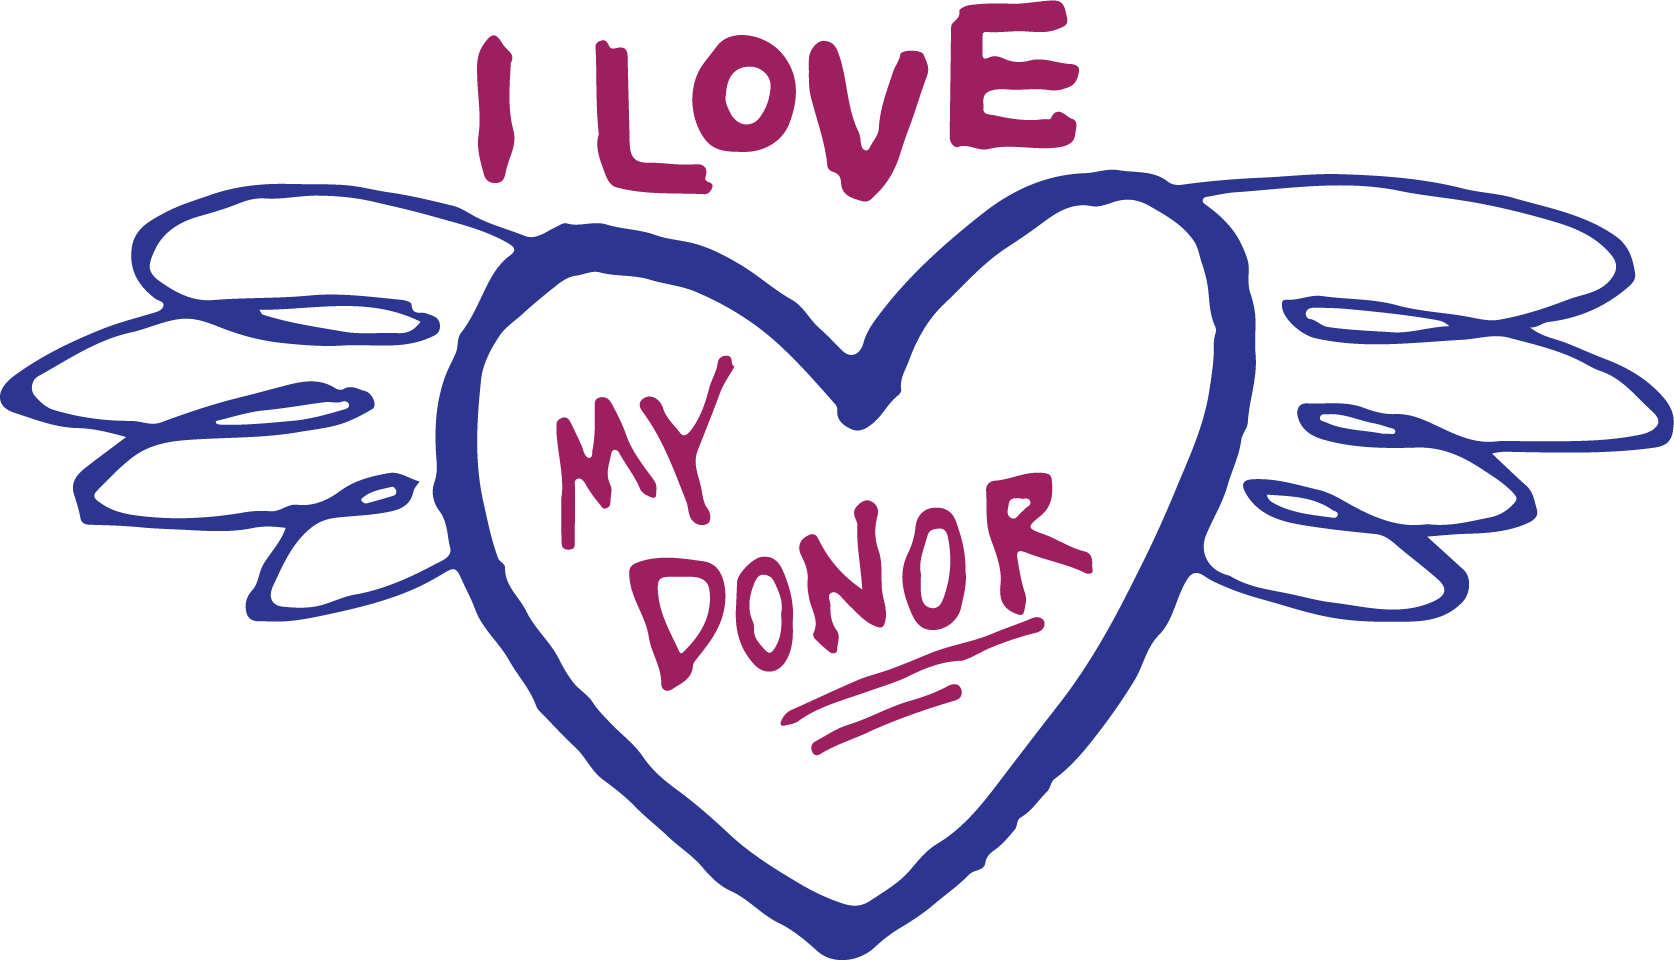 I love my donor doodle